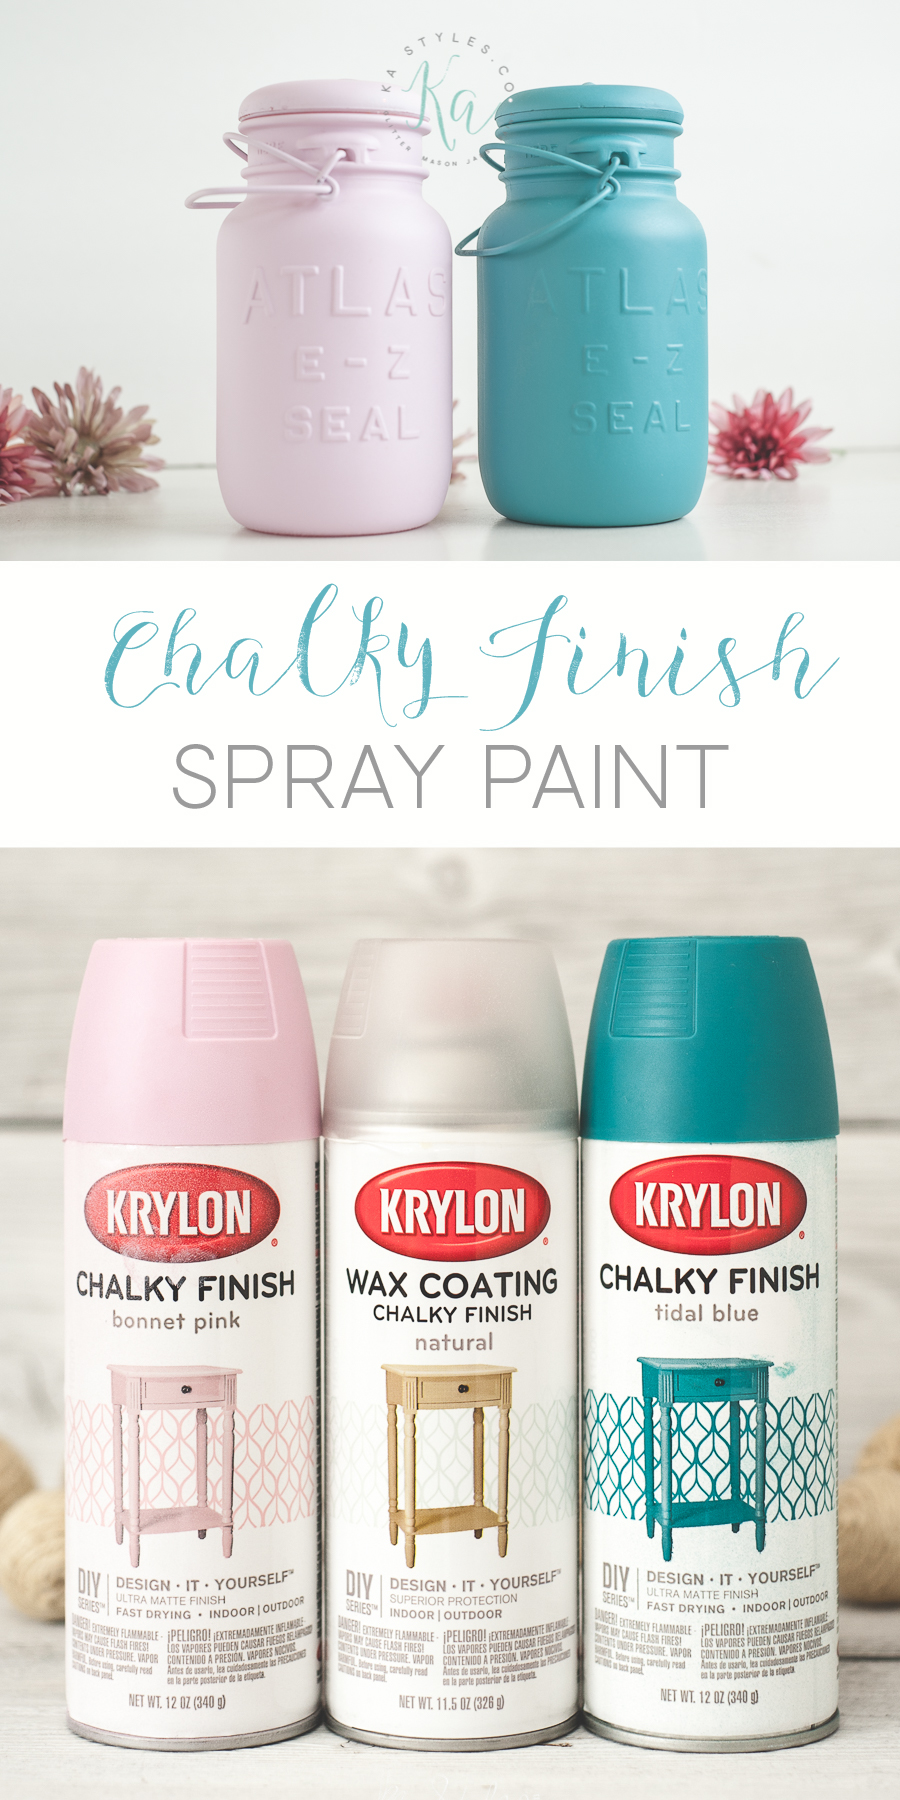 Krylon Chalky Finish spray paint. Pink, teal, gray and ivory.